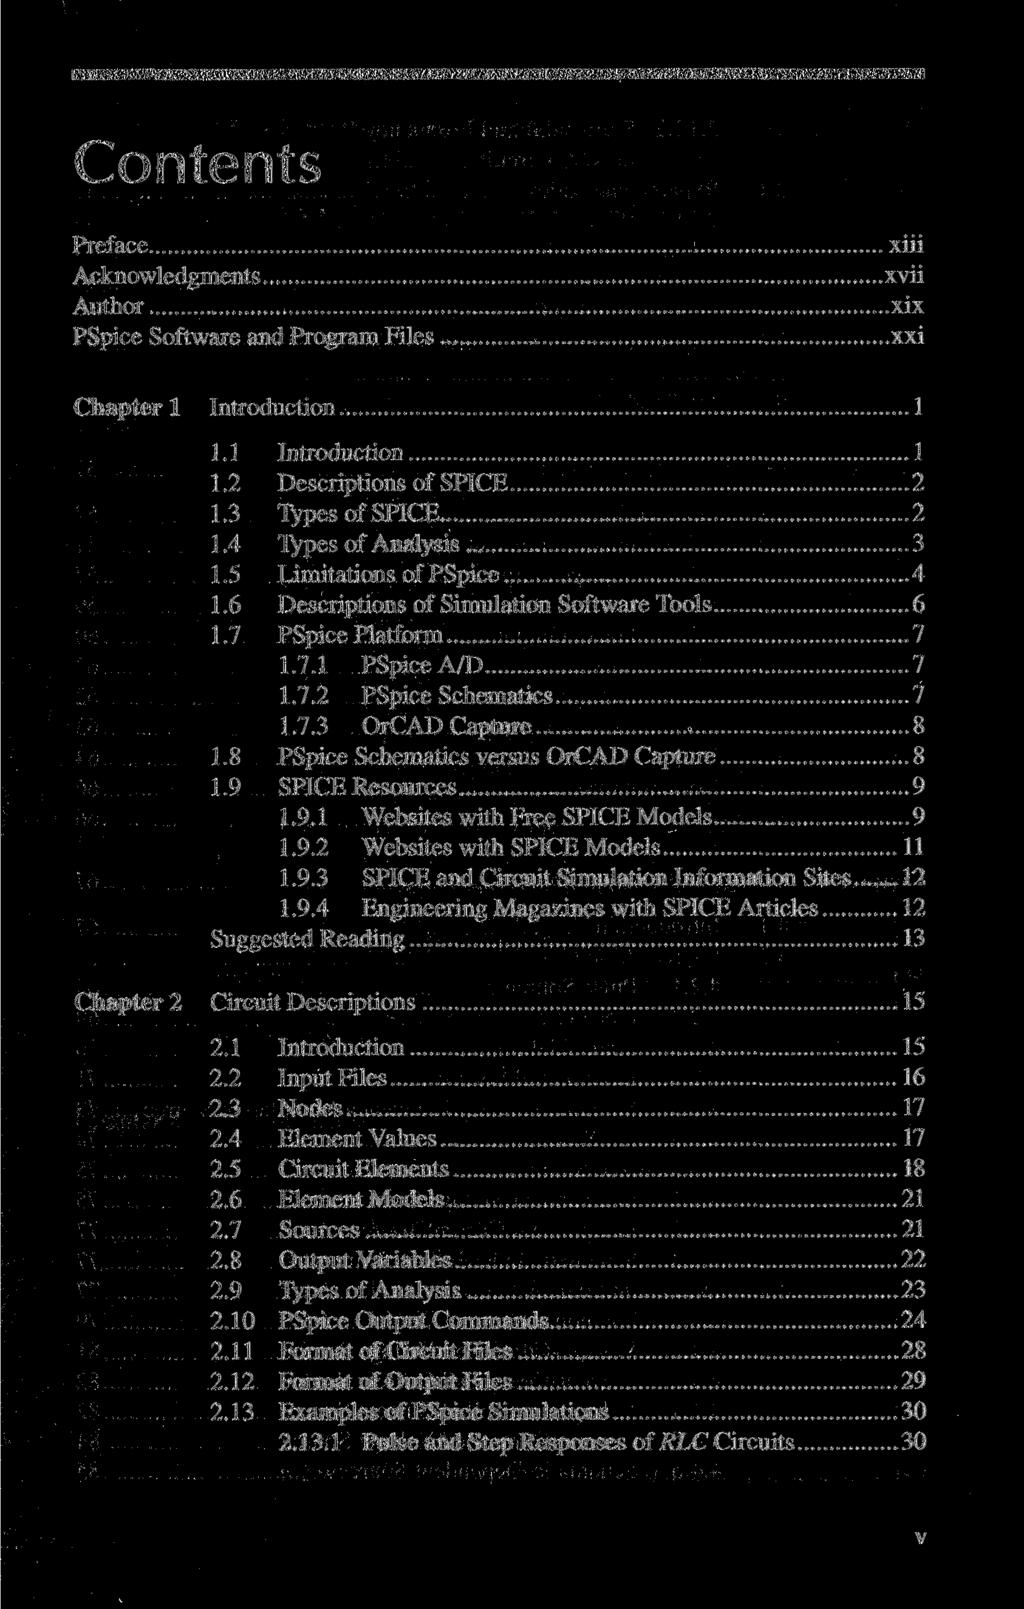 Preface Acknowledgments Author PSpice Software and Program Files xiii xvii xix xxi Chapter 1 Introduction 1 1.1 Introduction 1 1.2 Descriptions of SPICE 2 1.3 Types of SPICE 2 1.